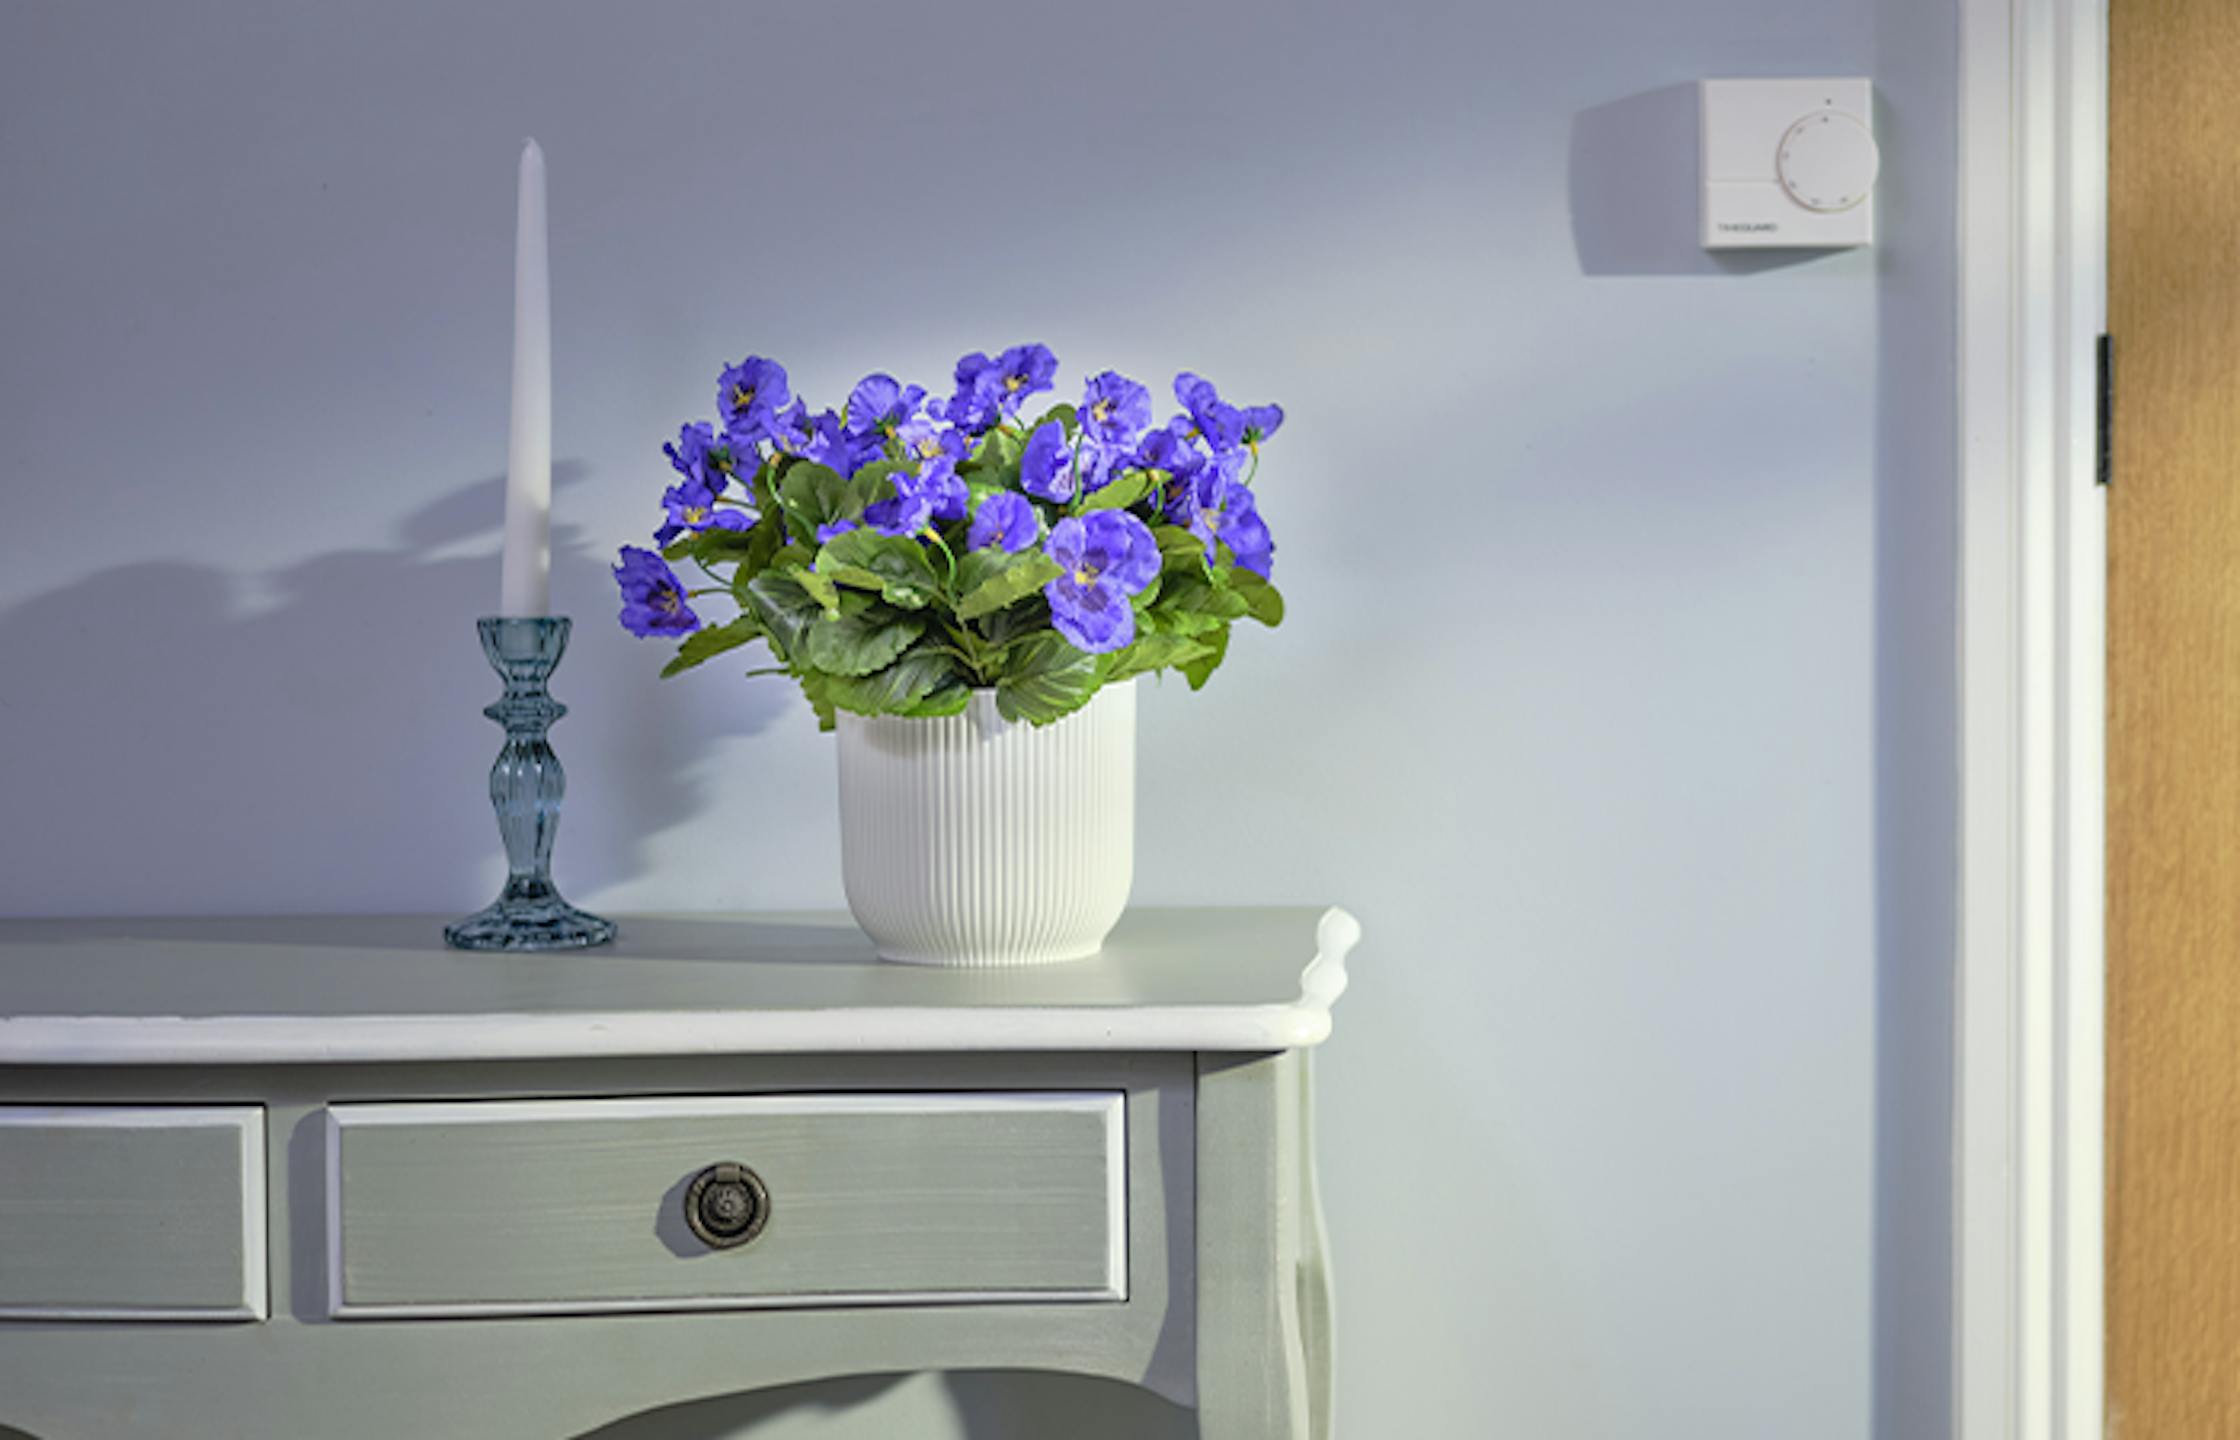 Blue pansy bushes in blue room